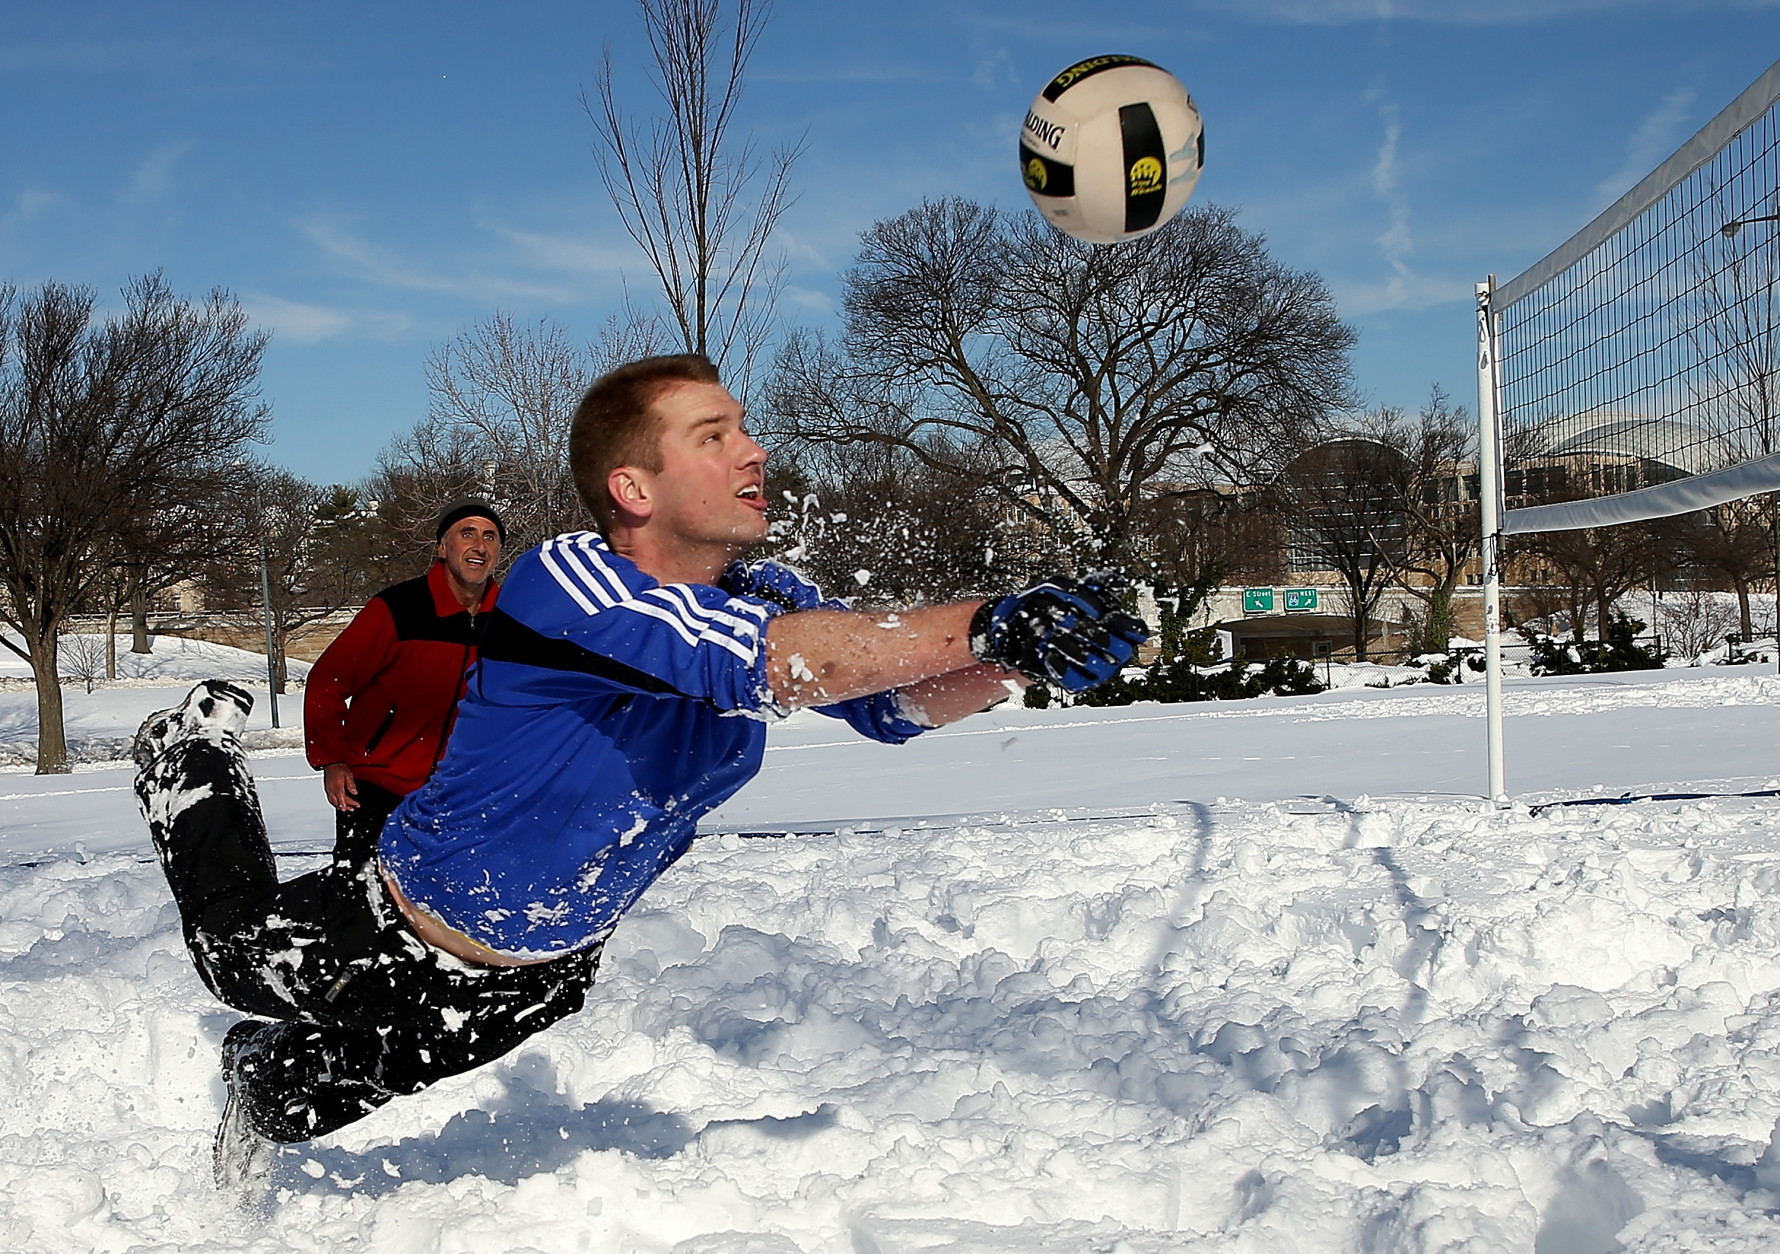 WASHINGTON, DC - JANUARY 25:  Scott Behrens dives for the ball during a friendly game of volleyball with friends in the snow January 25, 2016 in Washington, DC. Winter Storm Jonas hit the East Coast over the weekend, breaking snowfall records, closing places of work, causing 29 storm-related deaths, leaving thousands of homes without power and serious flooding in coastal areas.  (Photo by Win McNamee/Getty Images)